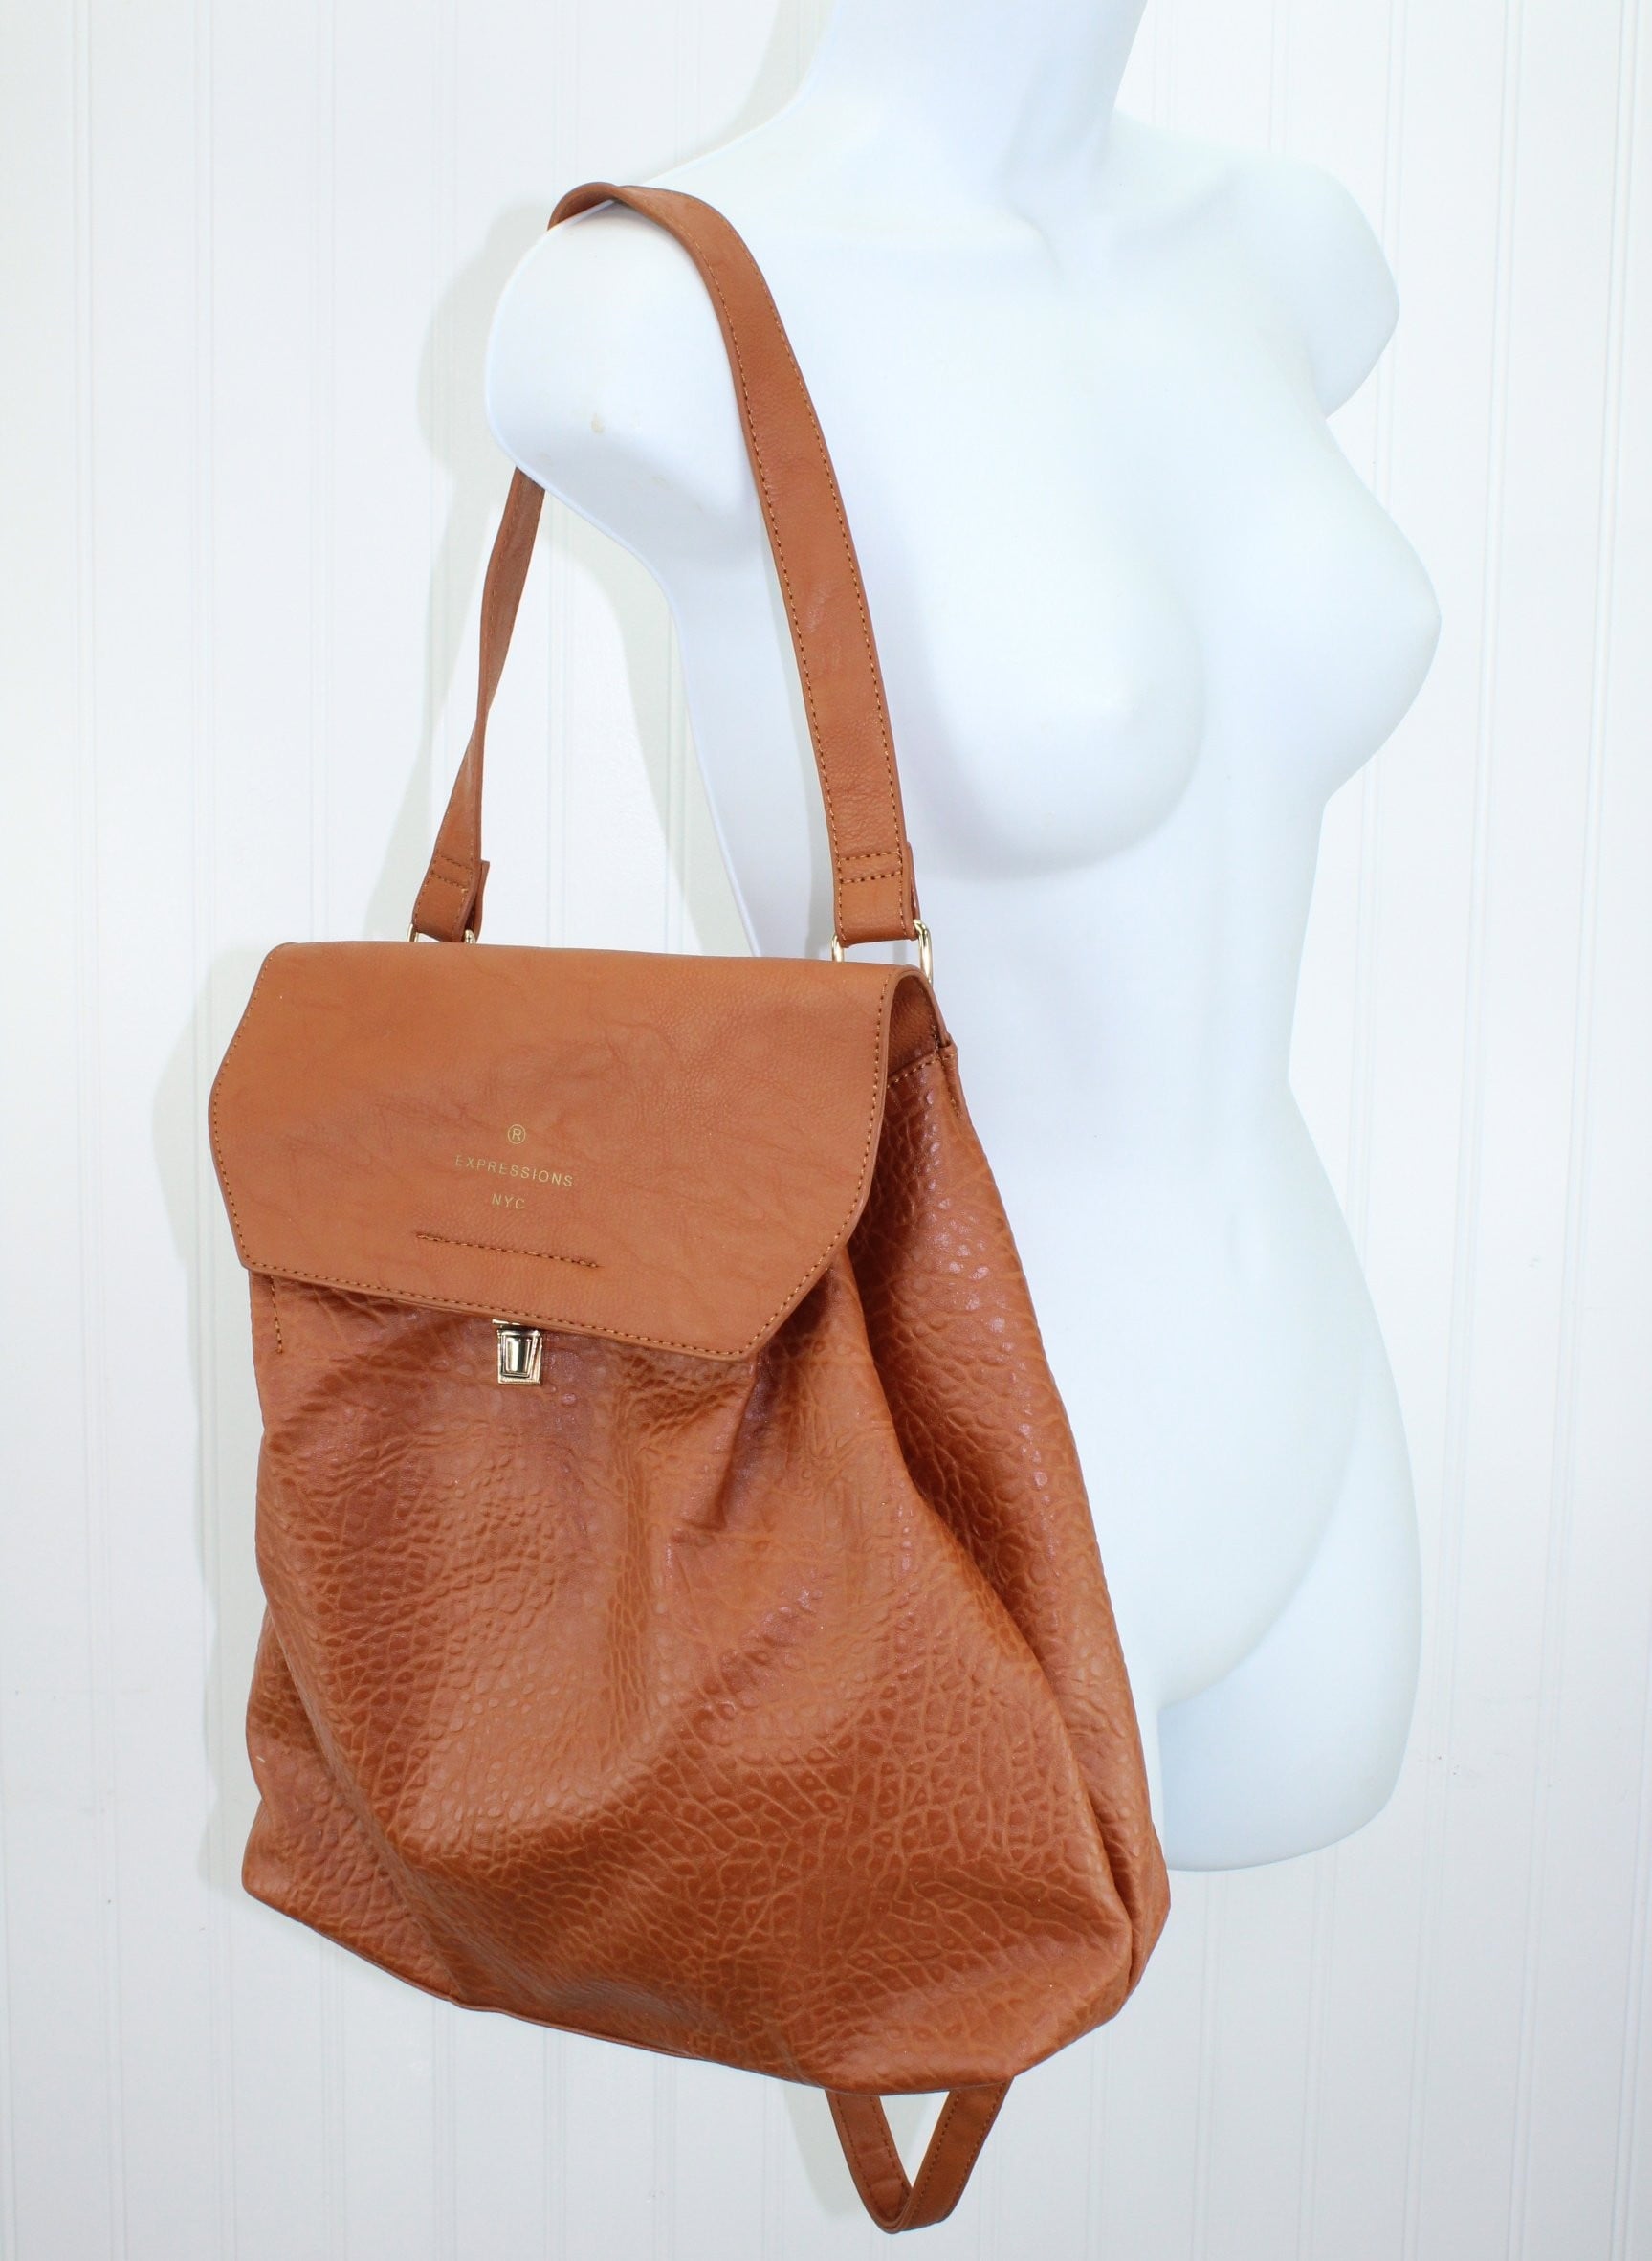 Expressions NYC Shoulder Bag Backpack Caramel Textured Faux  Leather Appears Unused